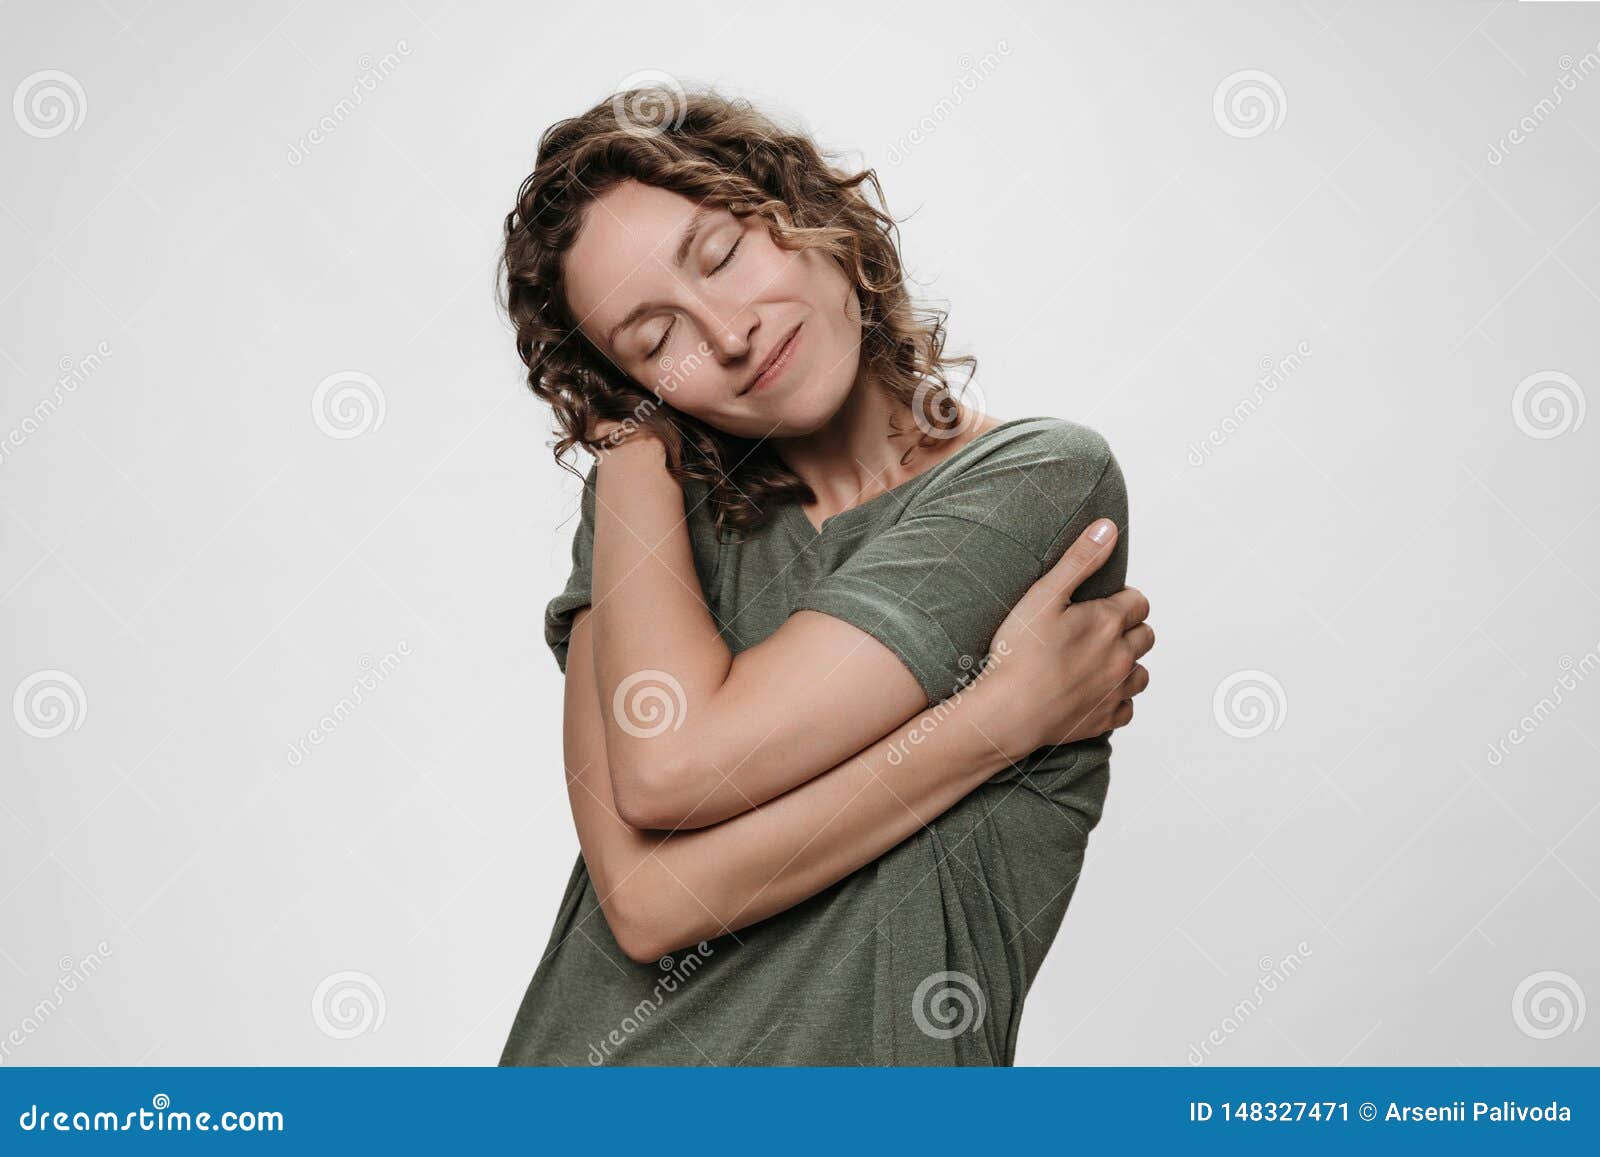 young curly woman hugging herself, looks happy, loves herself, has high self esteem